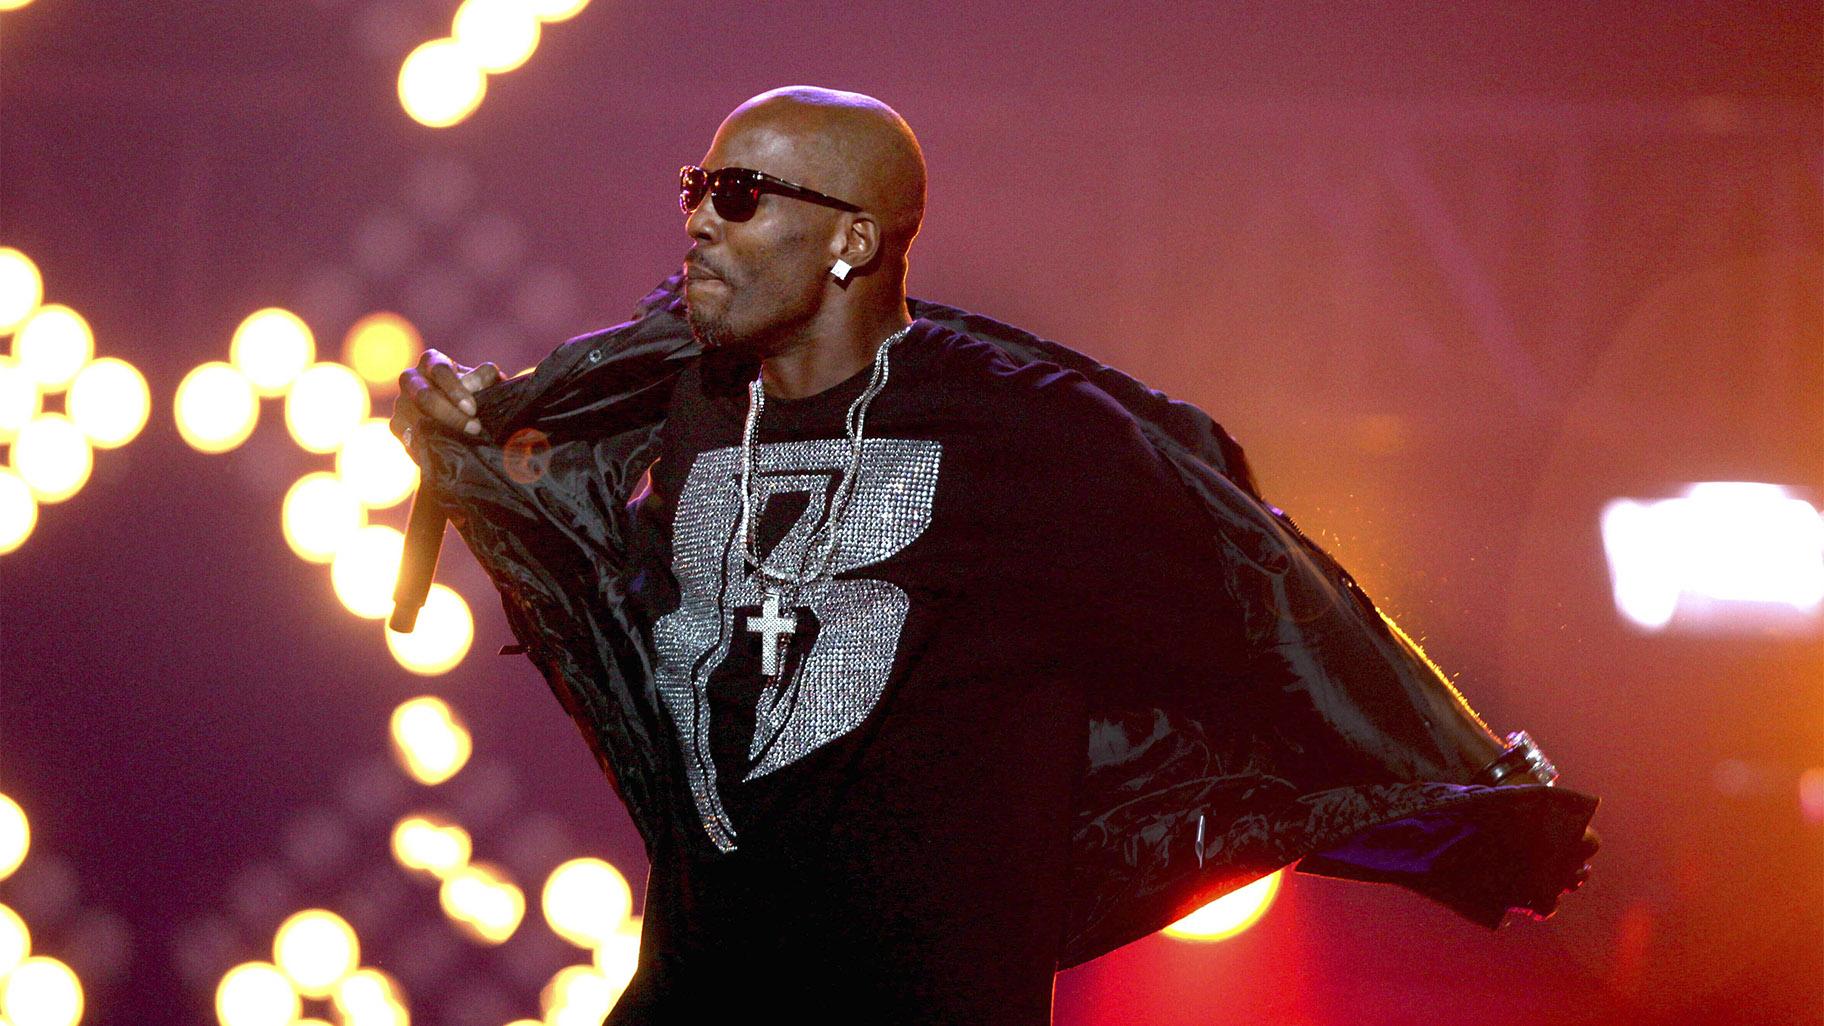 The family of rapper DMX says he has died at age 50 after a career in which he delivered iconic hip-hop songs such as “Ruff Ryders’ Anthem." A statement from the family says the Grammy-nominated rapper died at a hospital in White Plains, New York, "with his family by his side after being placed on life support for the past few days. He was rushed to a New York hospital from his home April 2. (AP Photo / David Goldman, File)